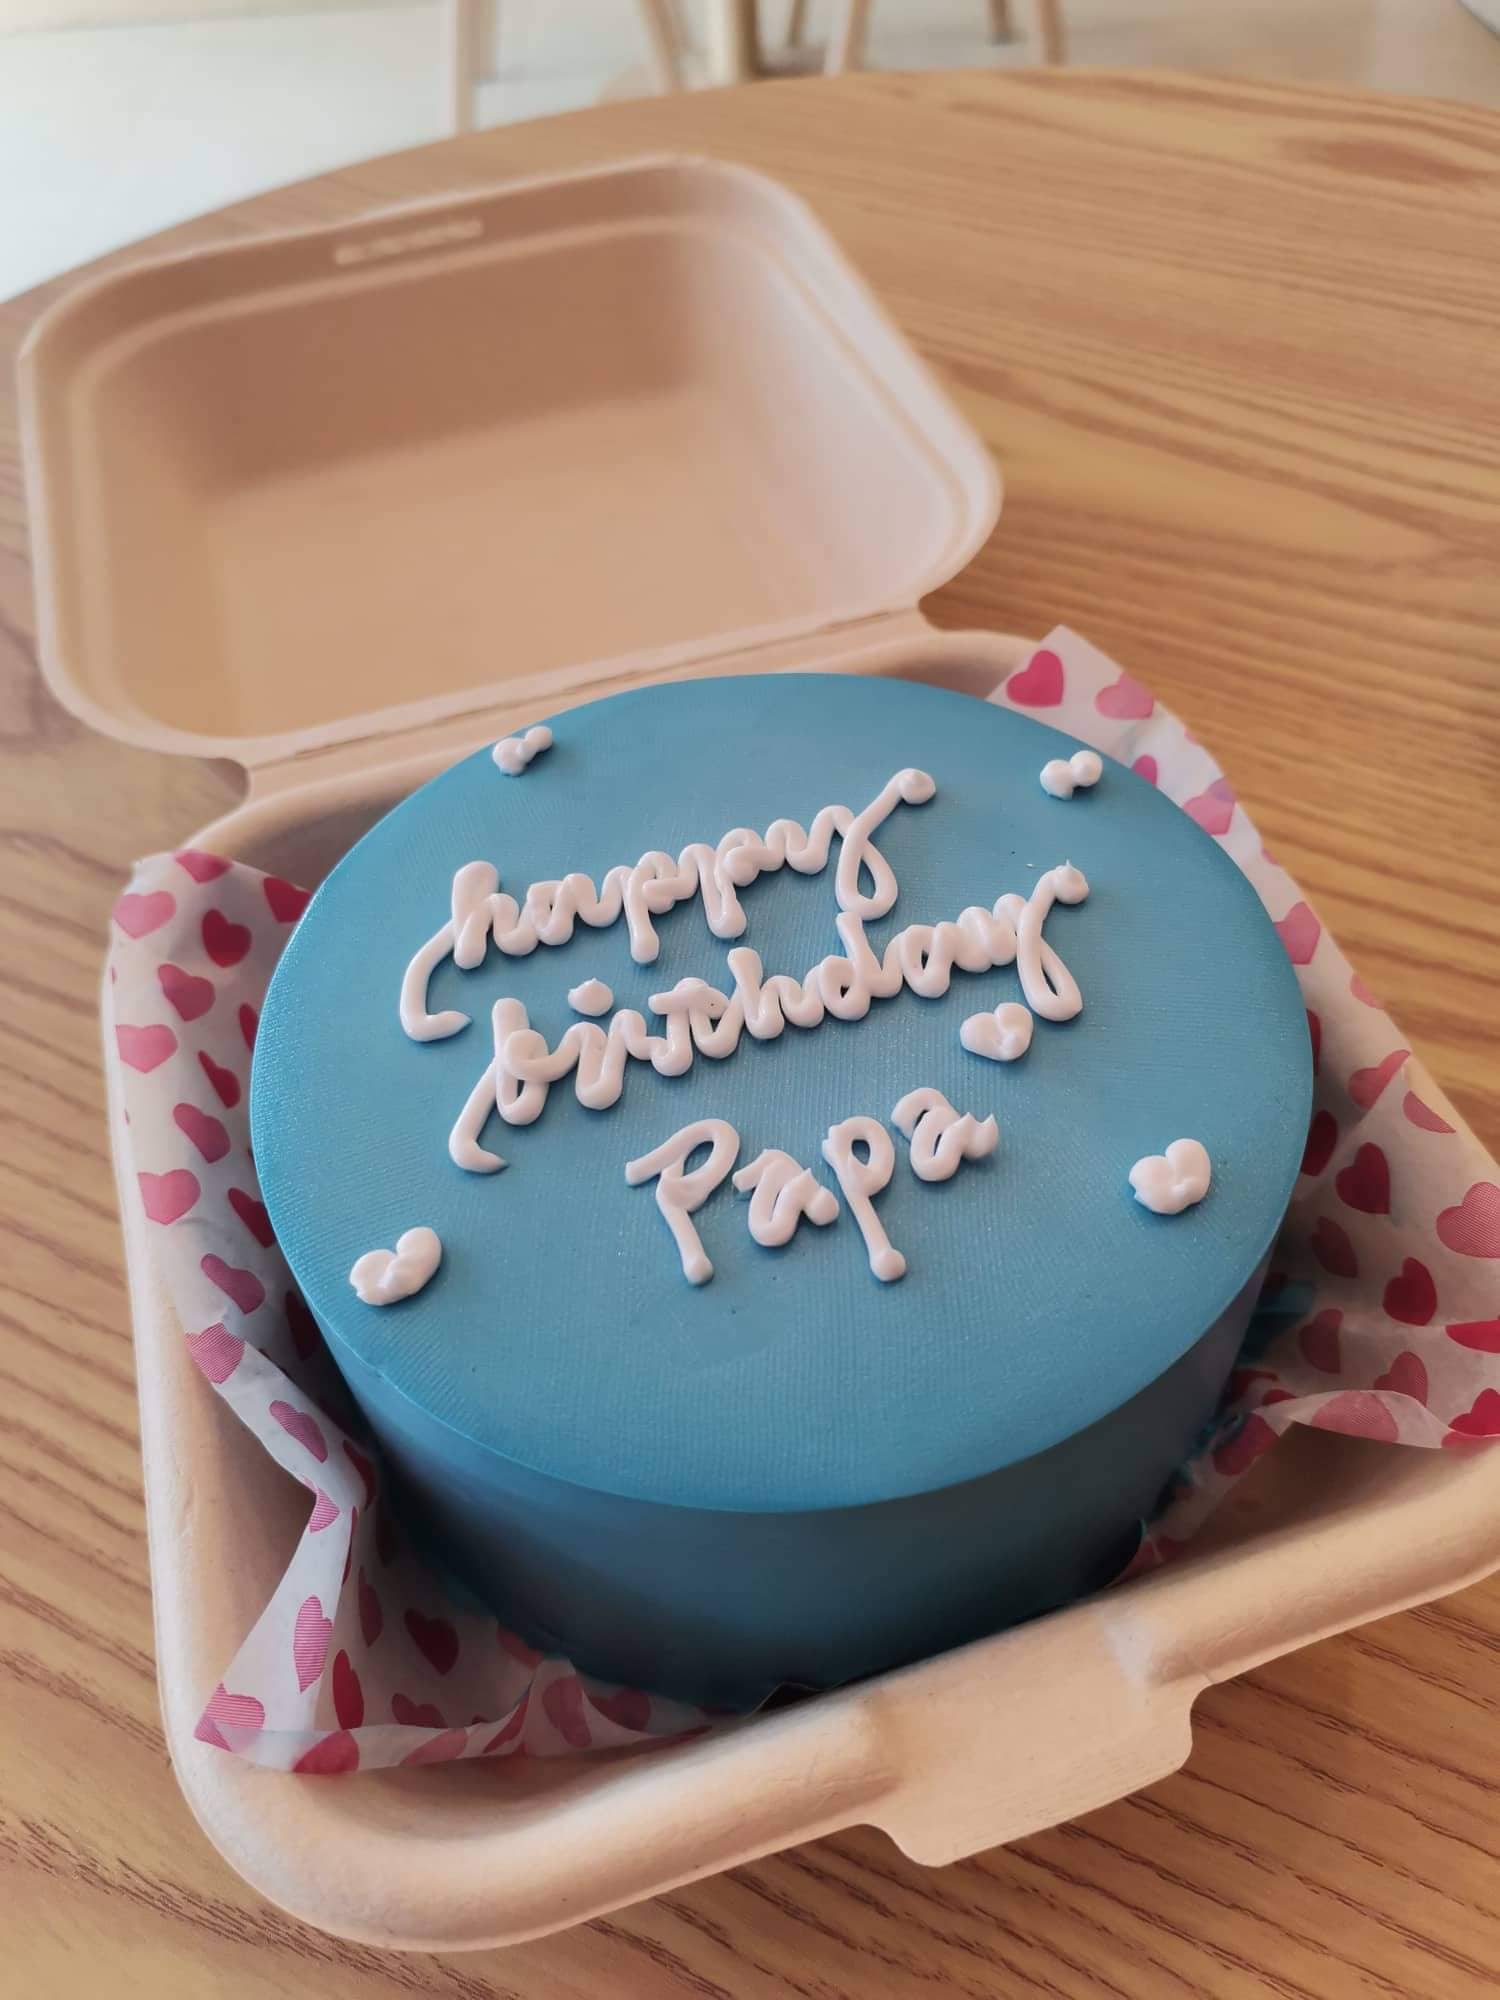 Happy Birthday Papa Special Cake With Your Name